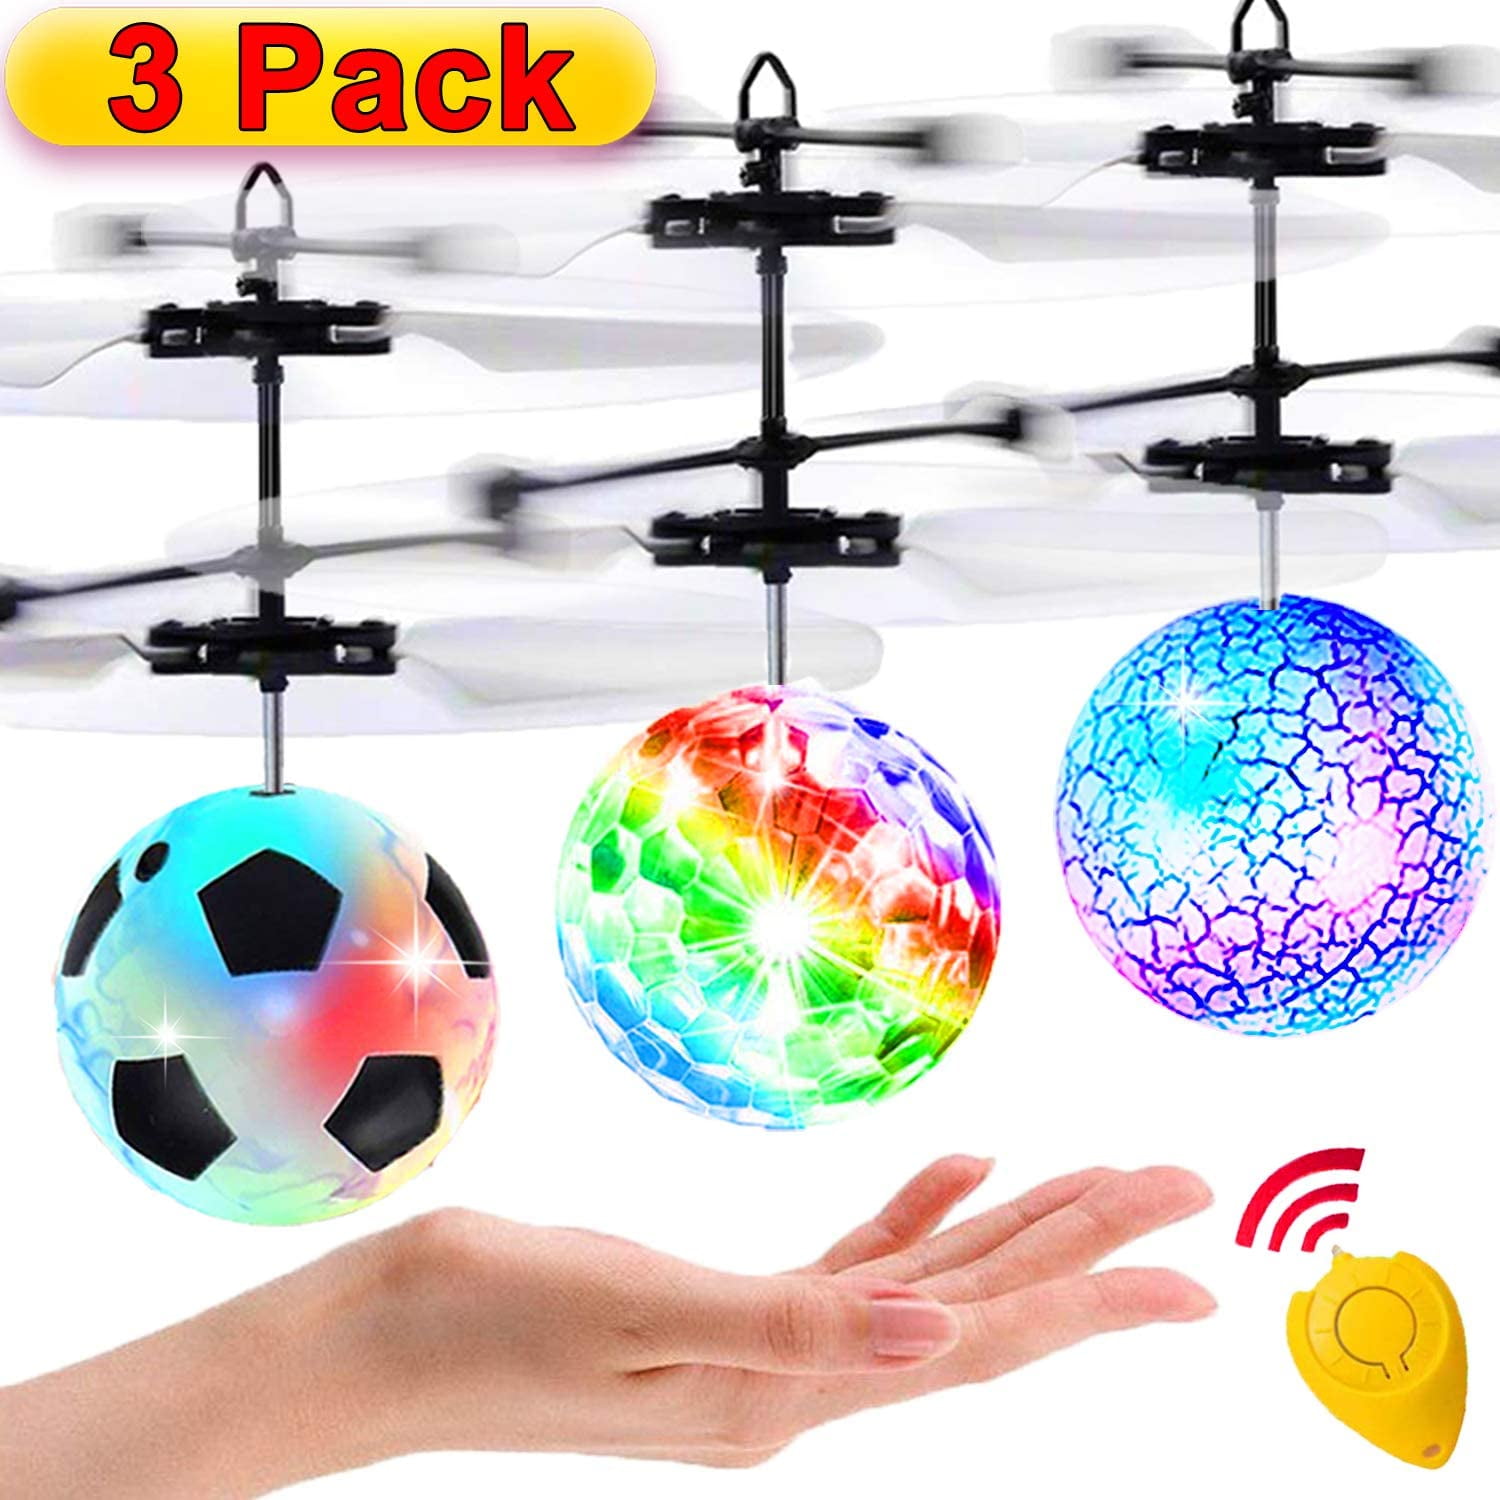 2020 Upgrade RC Flying Balls 2 Pack RC Flying Ball for Kids Boys Girls Glow Flying Mini Drones Hand Controll Helicopter with 2 Remote Controller Quadcopter Light Up Ball Toys Indoor Outdoor Games 